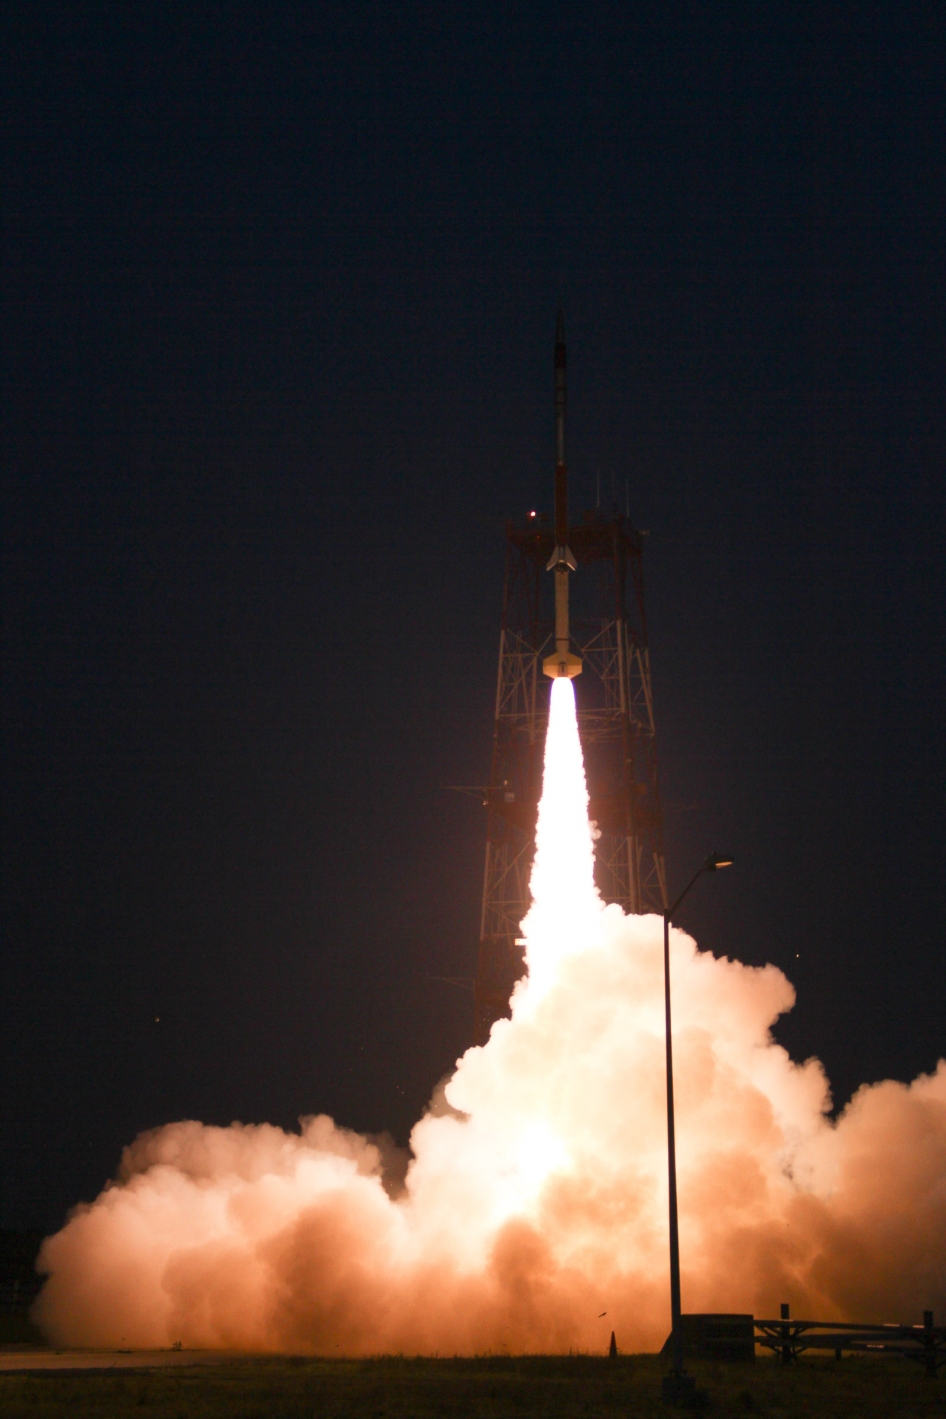 NASA image of sounding rocket launching from Wallops Flight Facility posted on AmericaSpace